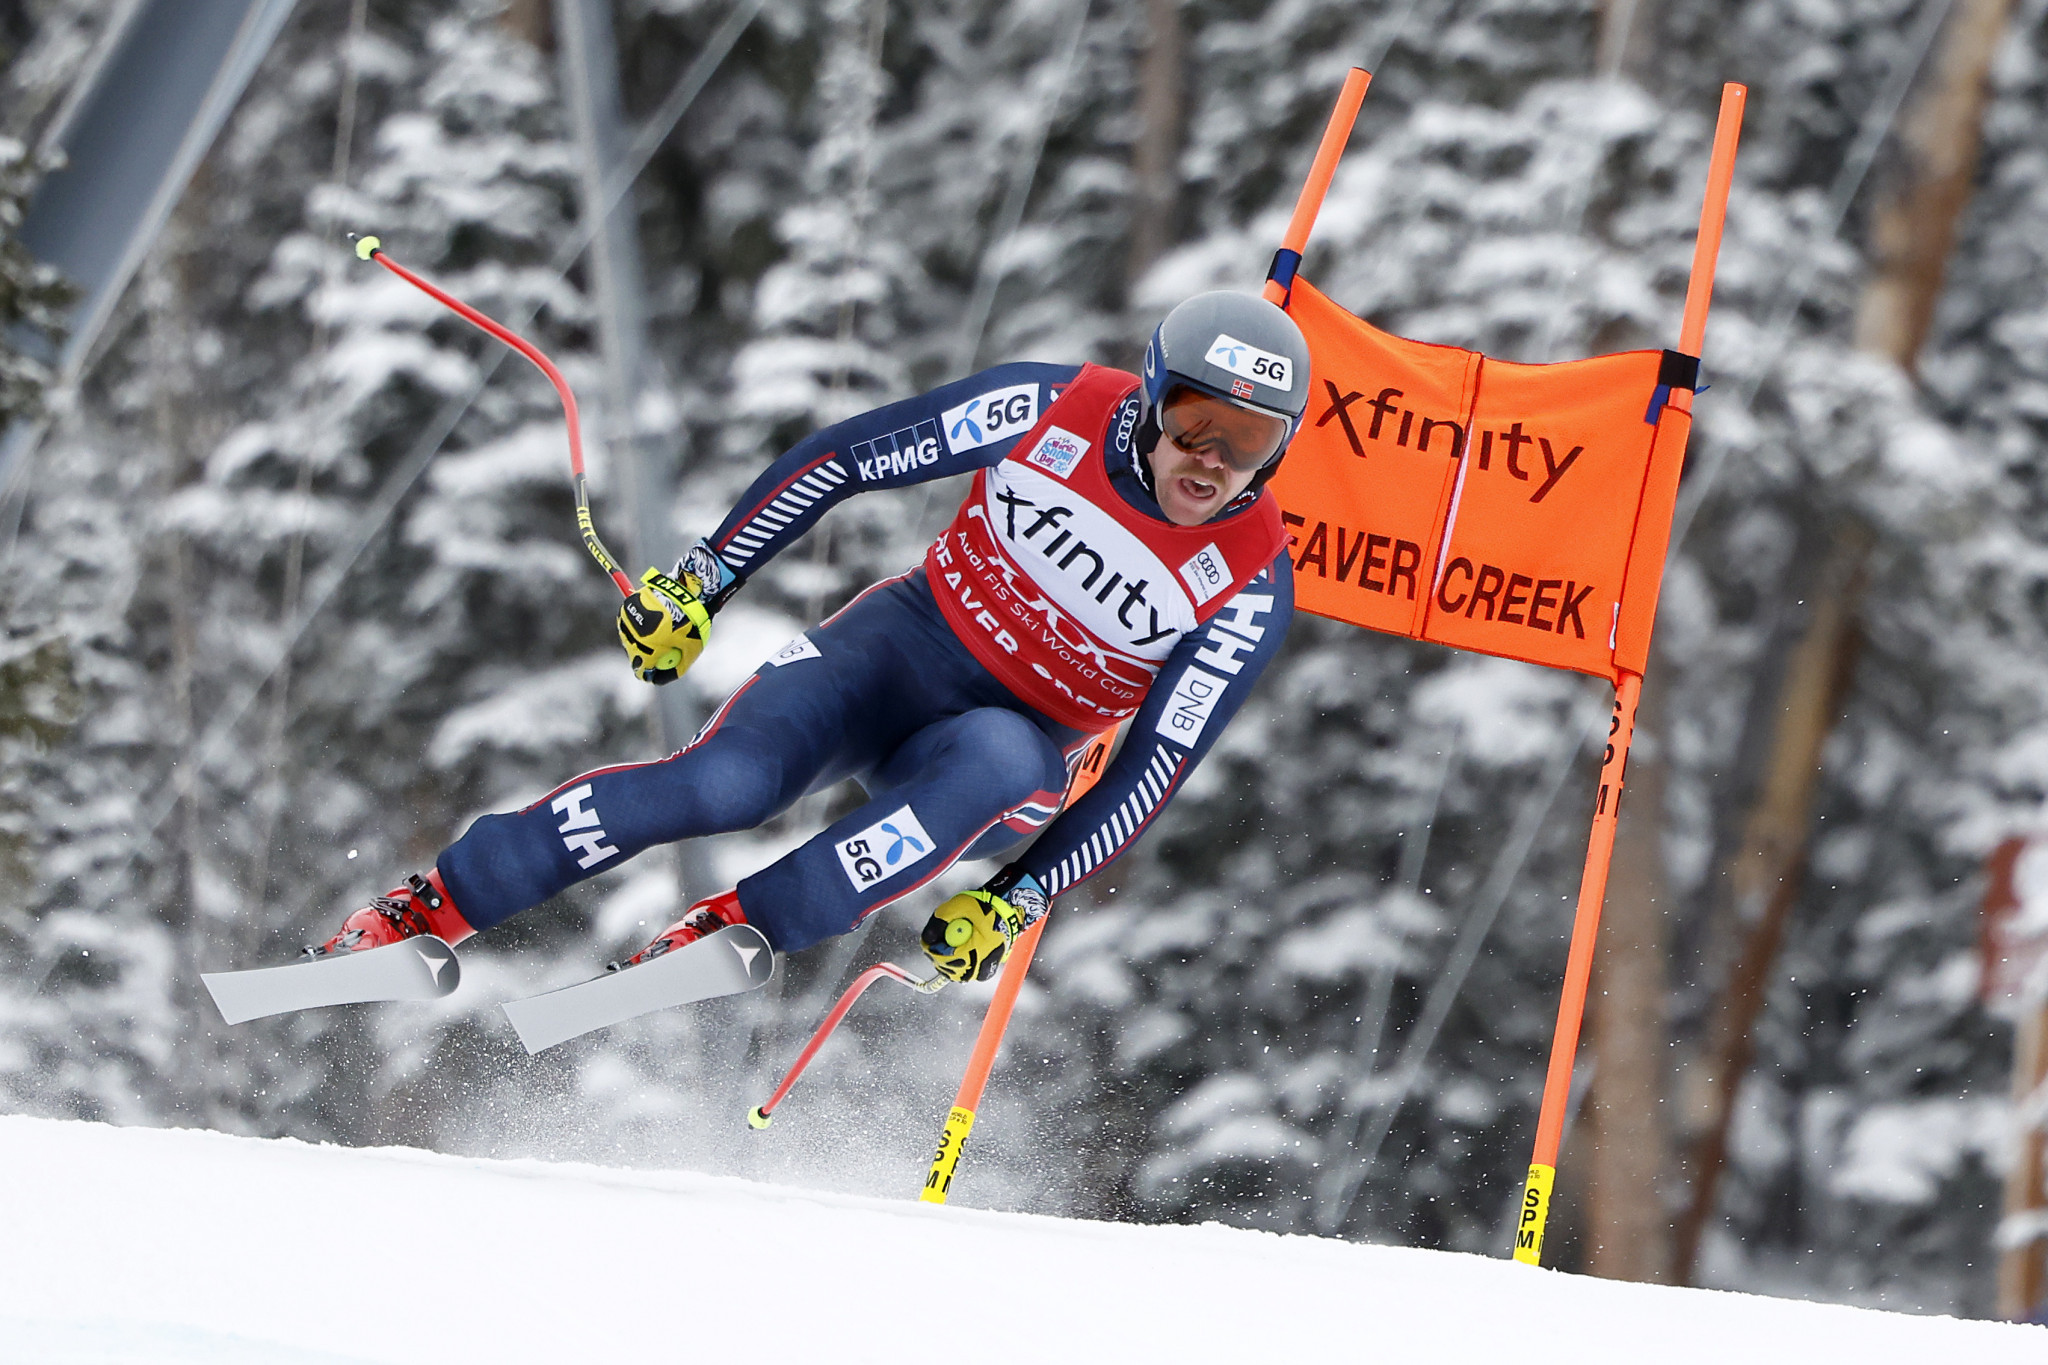 Norway's Aleksander Aamodt Kilde triumphed in the downhill event at the Alpine Ski World Cup in Beaver Creek ©Getty Images